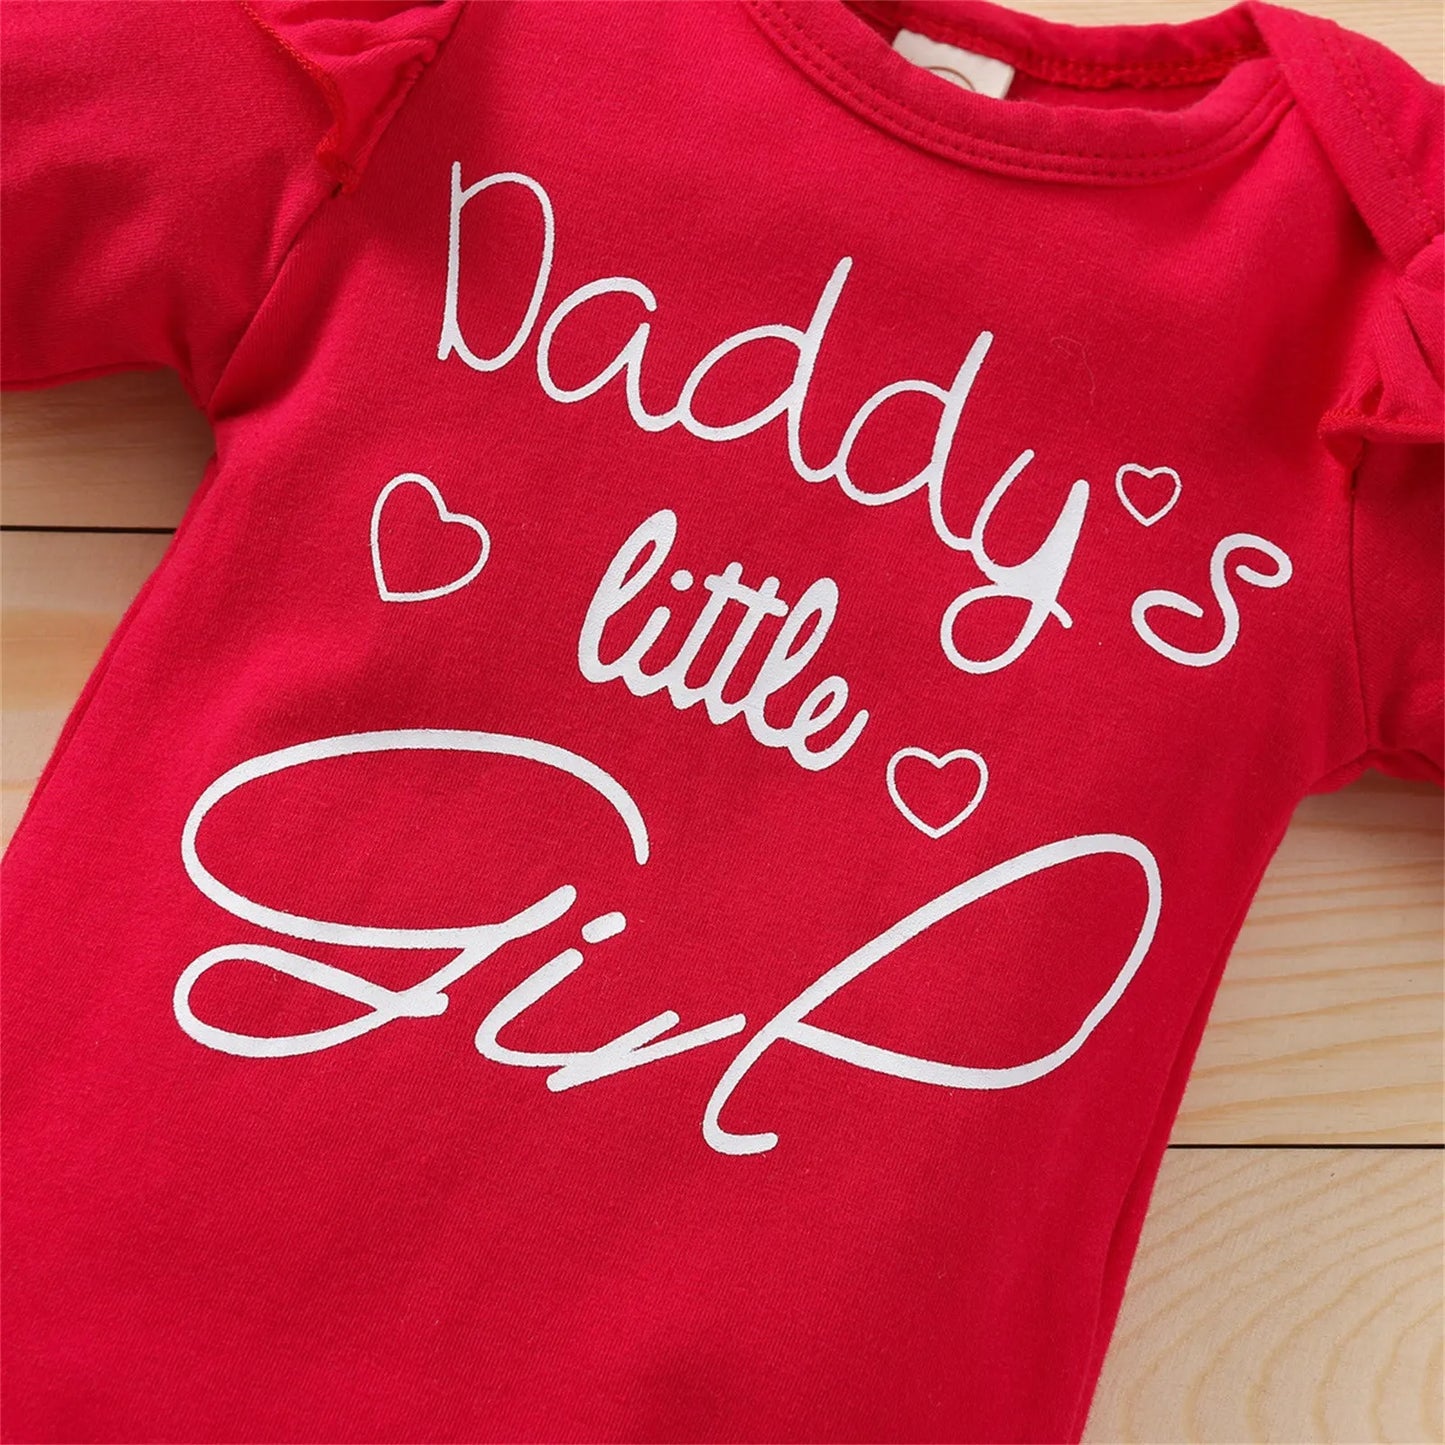 Charming Winter Set for Baby Girls: Cozy Fashion Delights